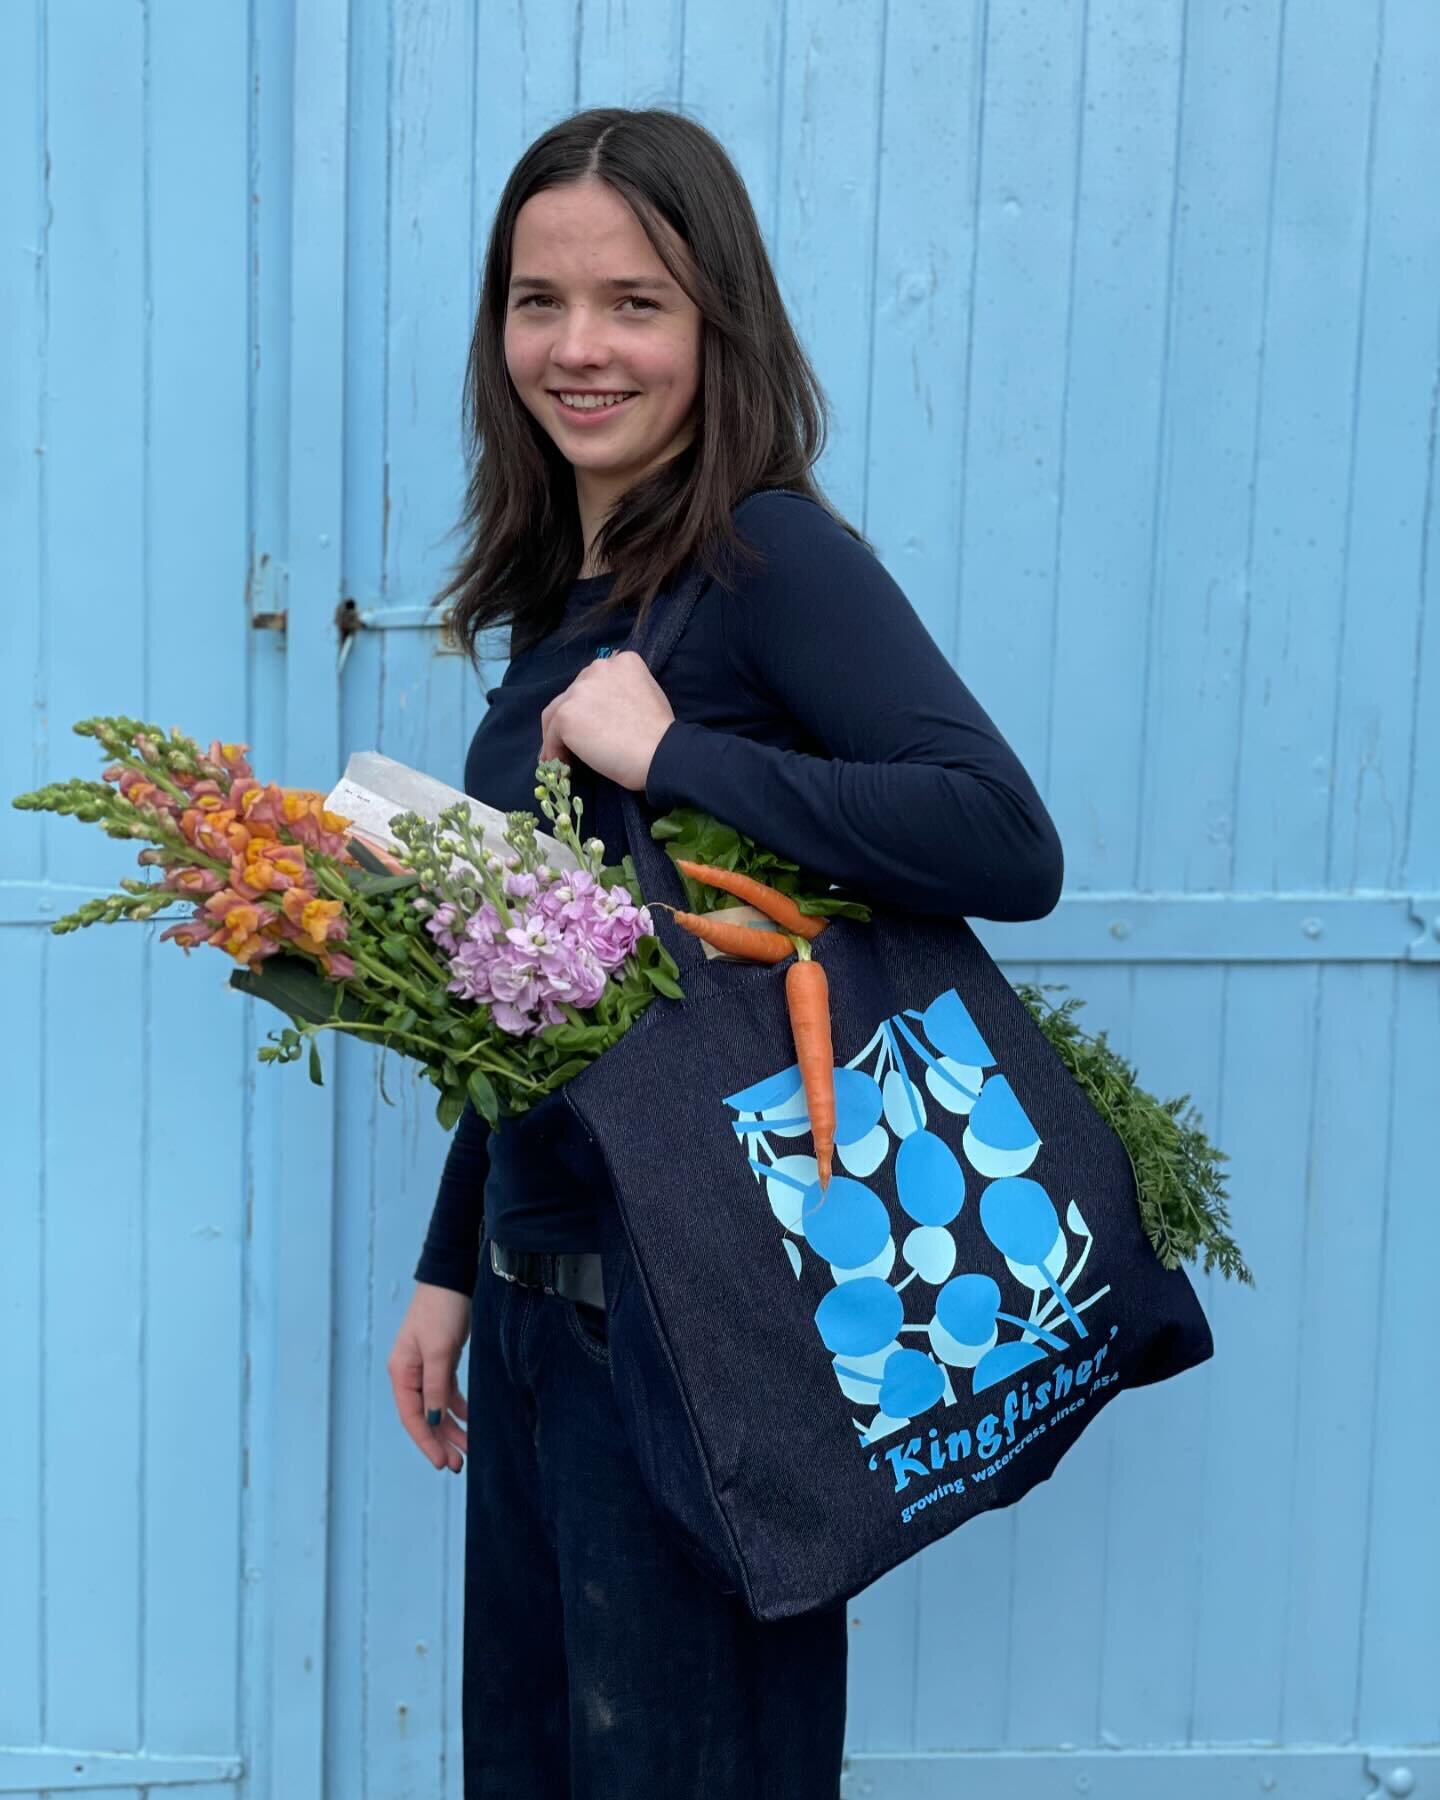 Easter shopping in style with our denim tote bag! #substanceequalsstyle 

#shopinstyle 
#denimtotebag 
#bagforlife 
#shopthoughtfully 
#shoplocal 
#shoplocalstayloyal 
#170yearsofgrowingwatercress
#kingfisherfarmshop